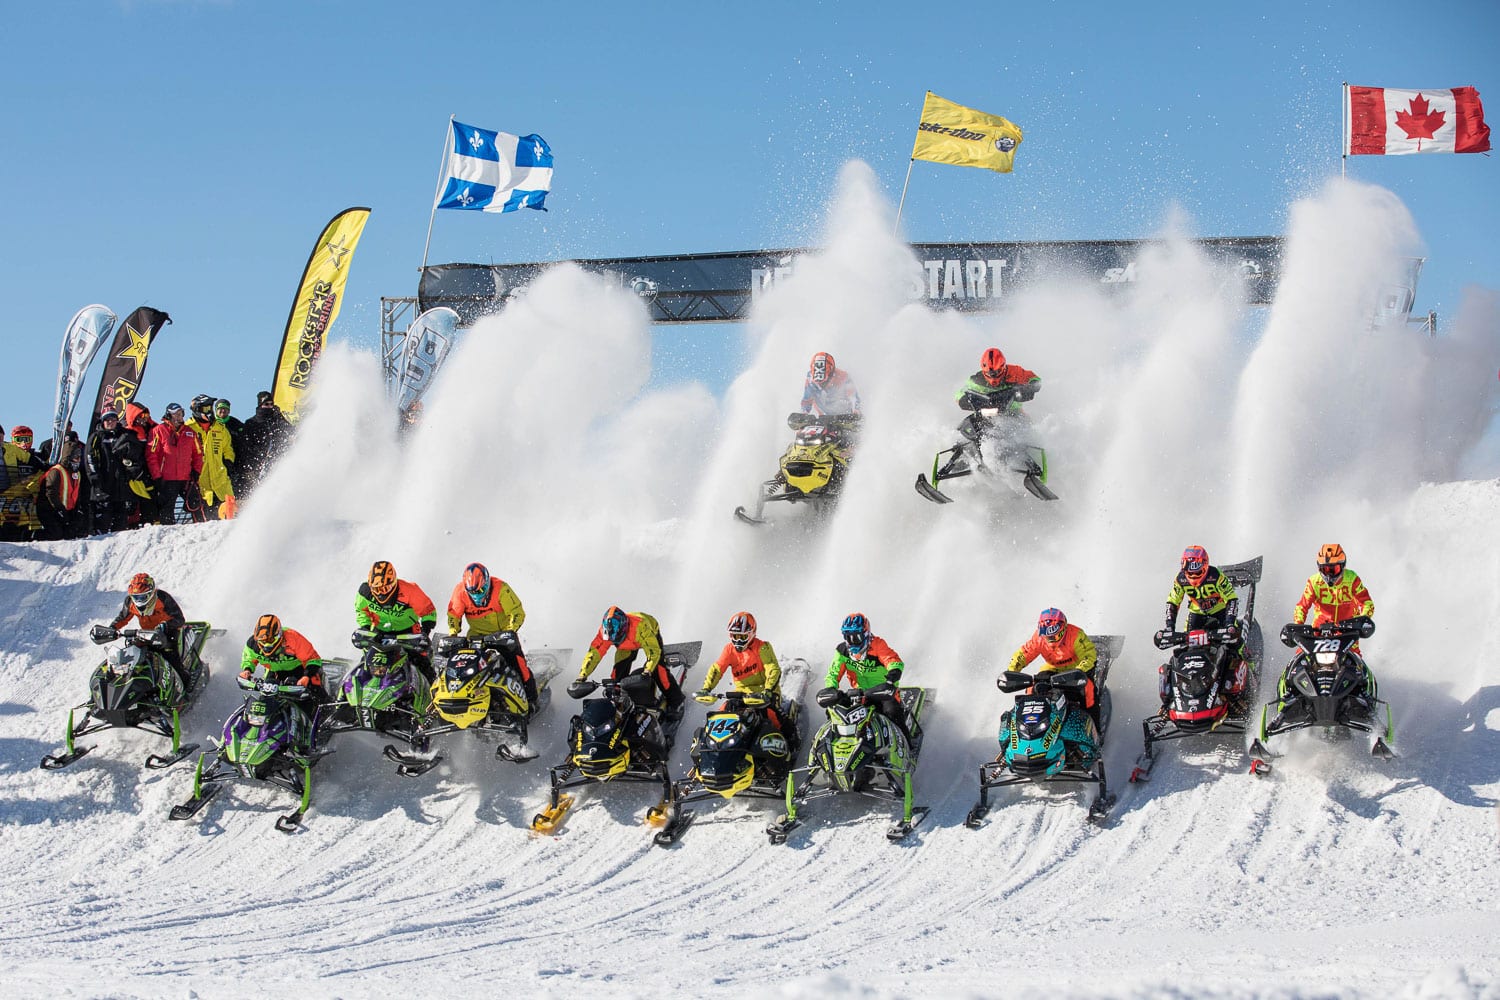 Grand Prix Ski-Doo de Valcourt 37th edition - Tim Tremblay wins for the 13th time in Valcourt, Megan Brodeur wins!